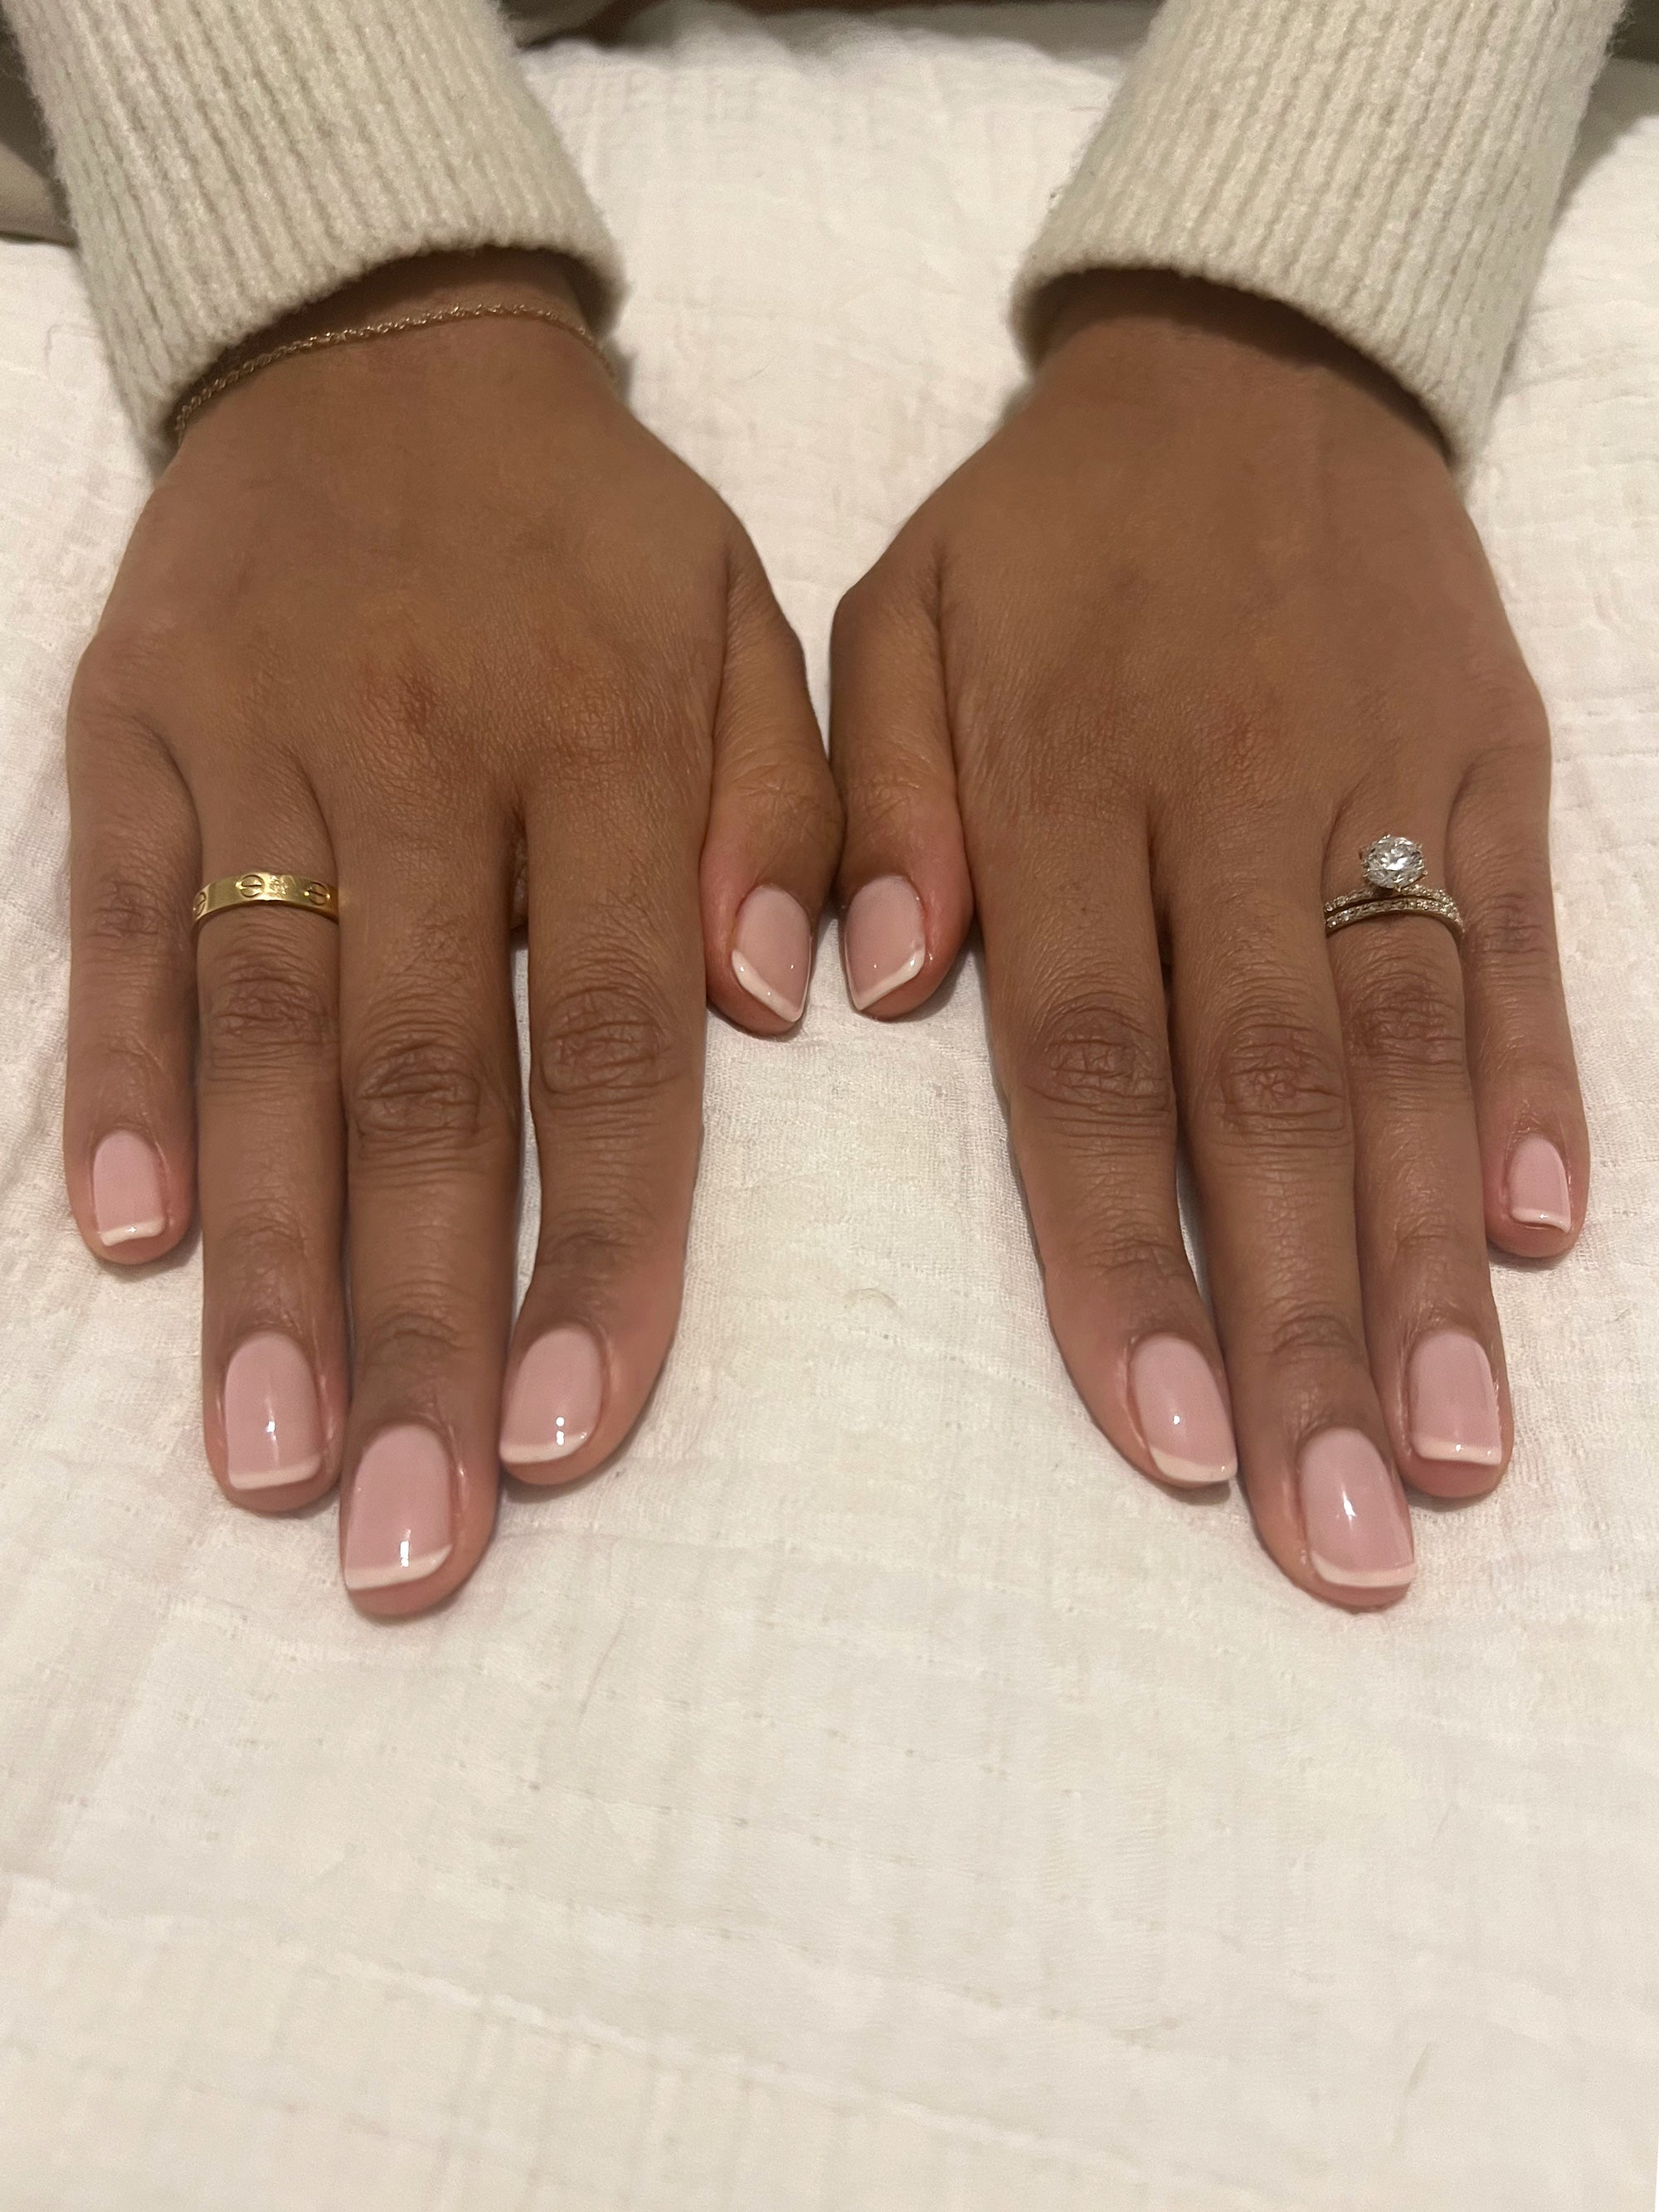 A gel French manicure should last 14 days or longer